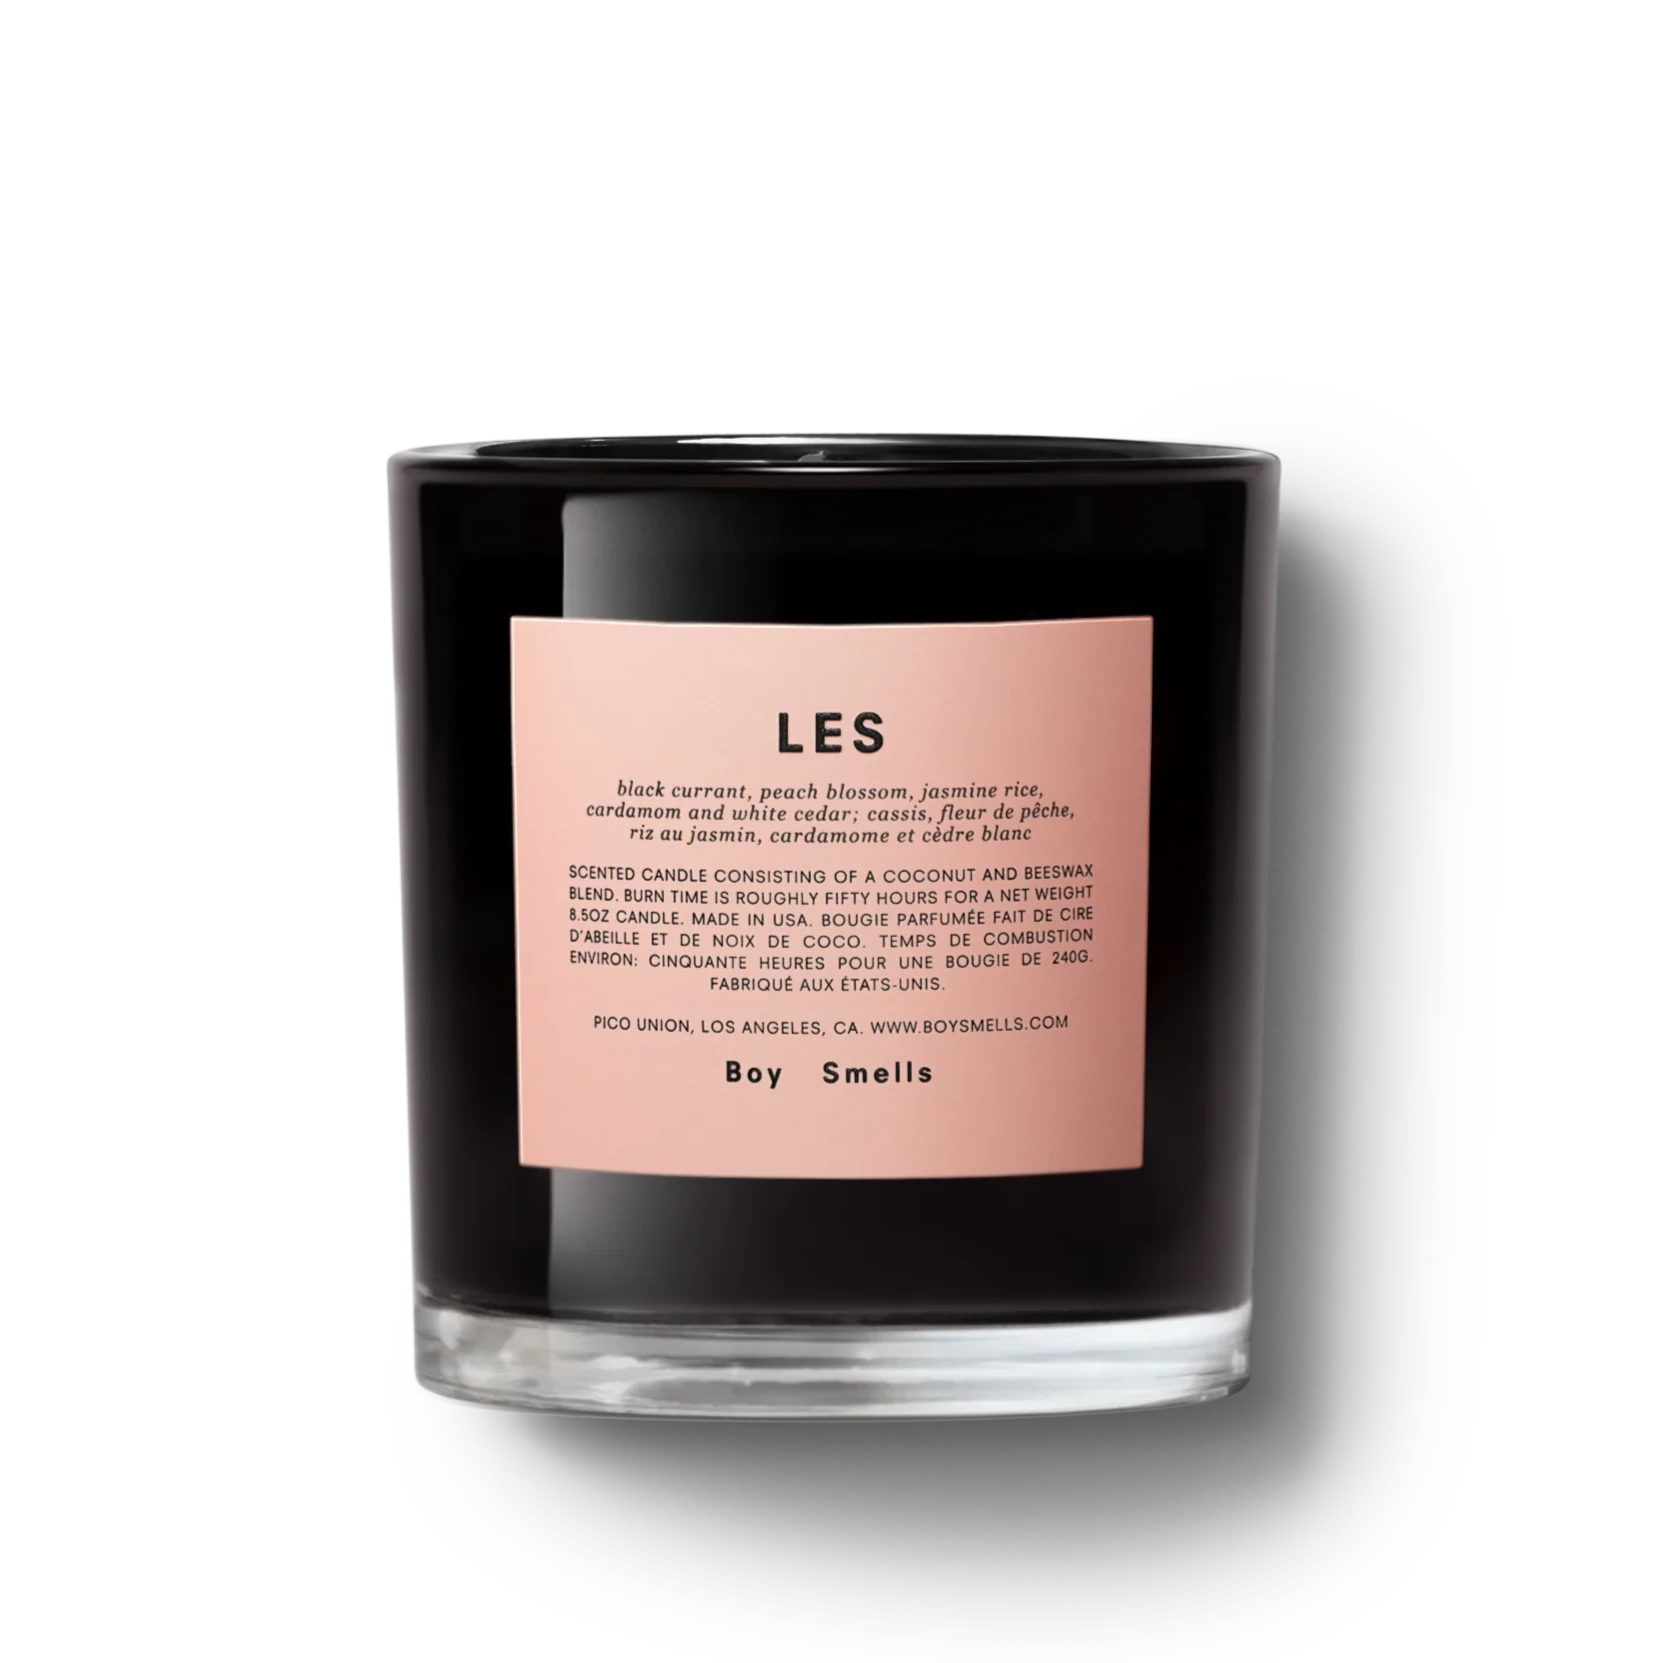 glossy black glass candle with pink label on it. pink label has black text